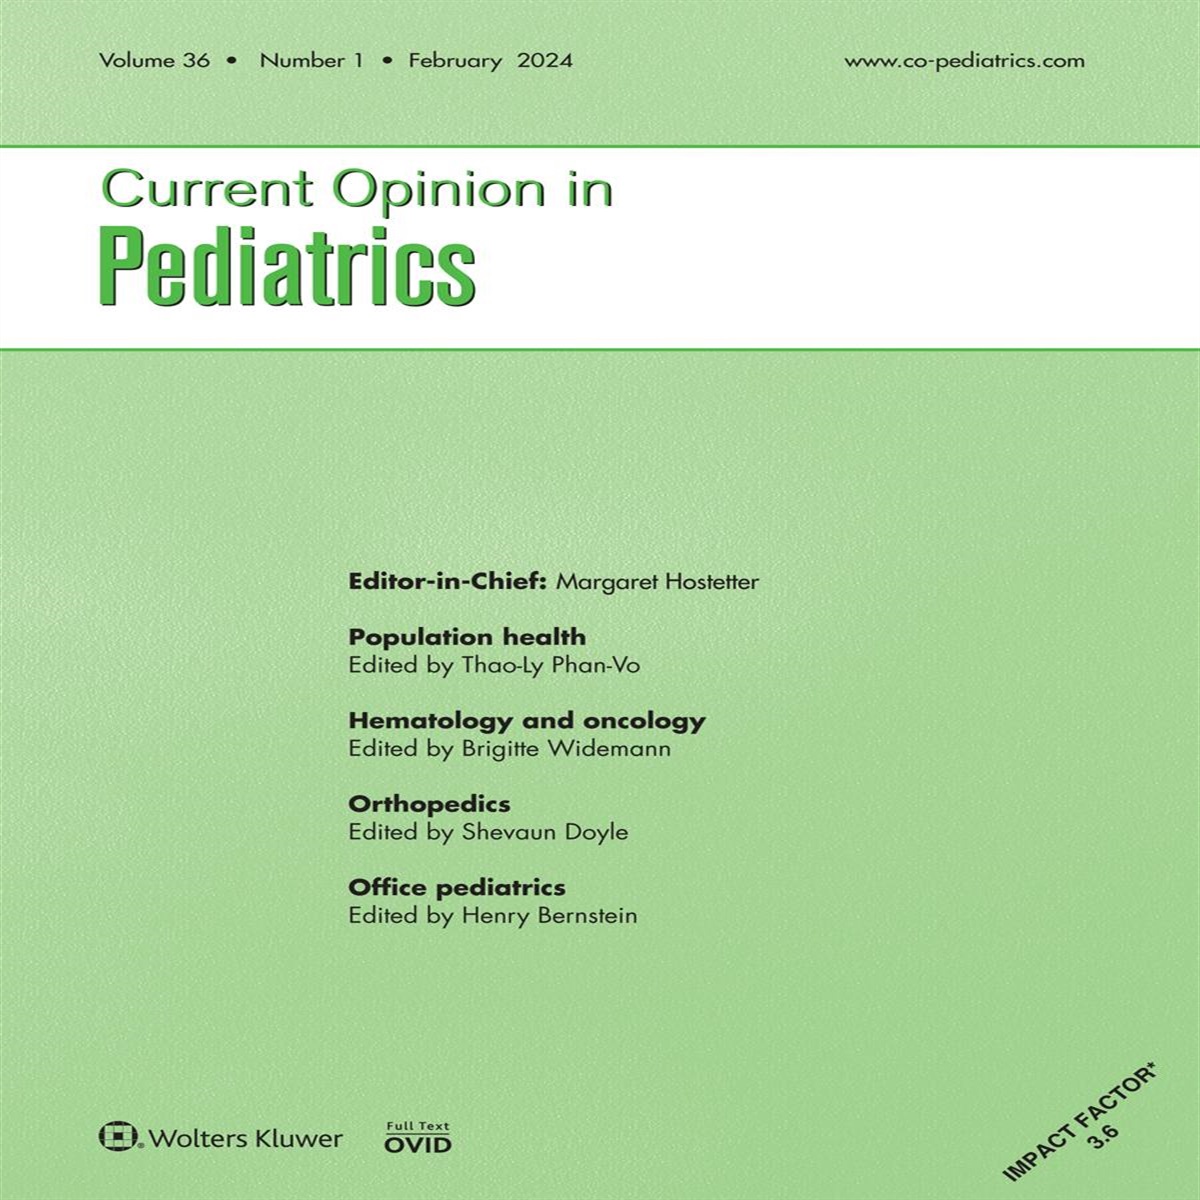 A path towards equity in pediatric obesity outcomes